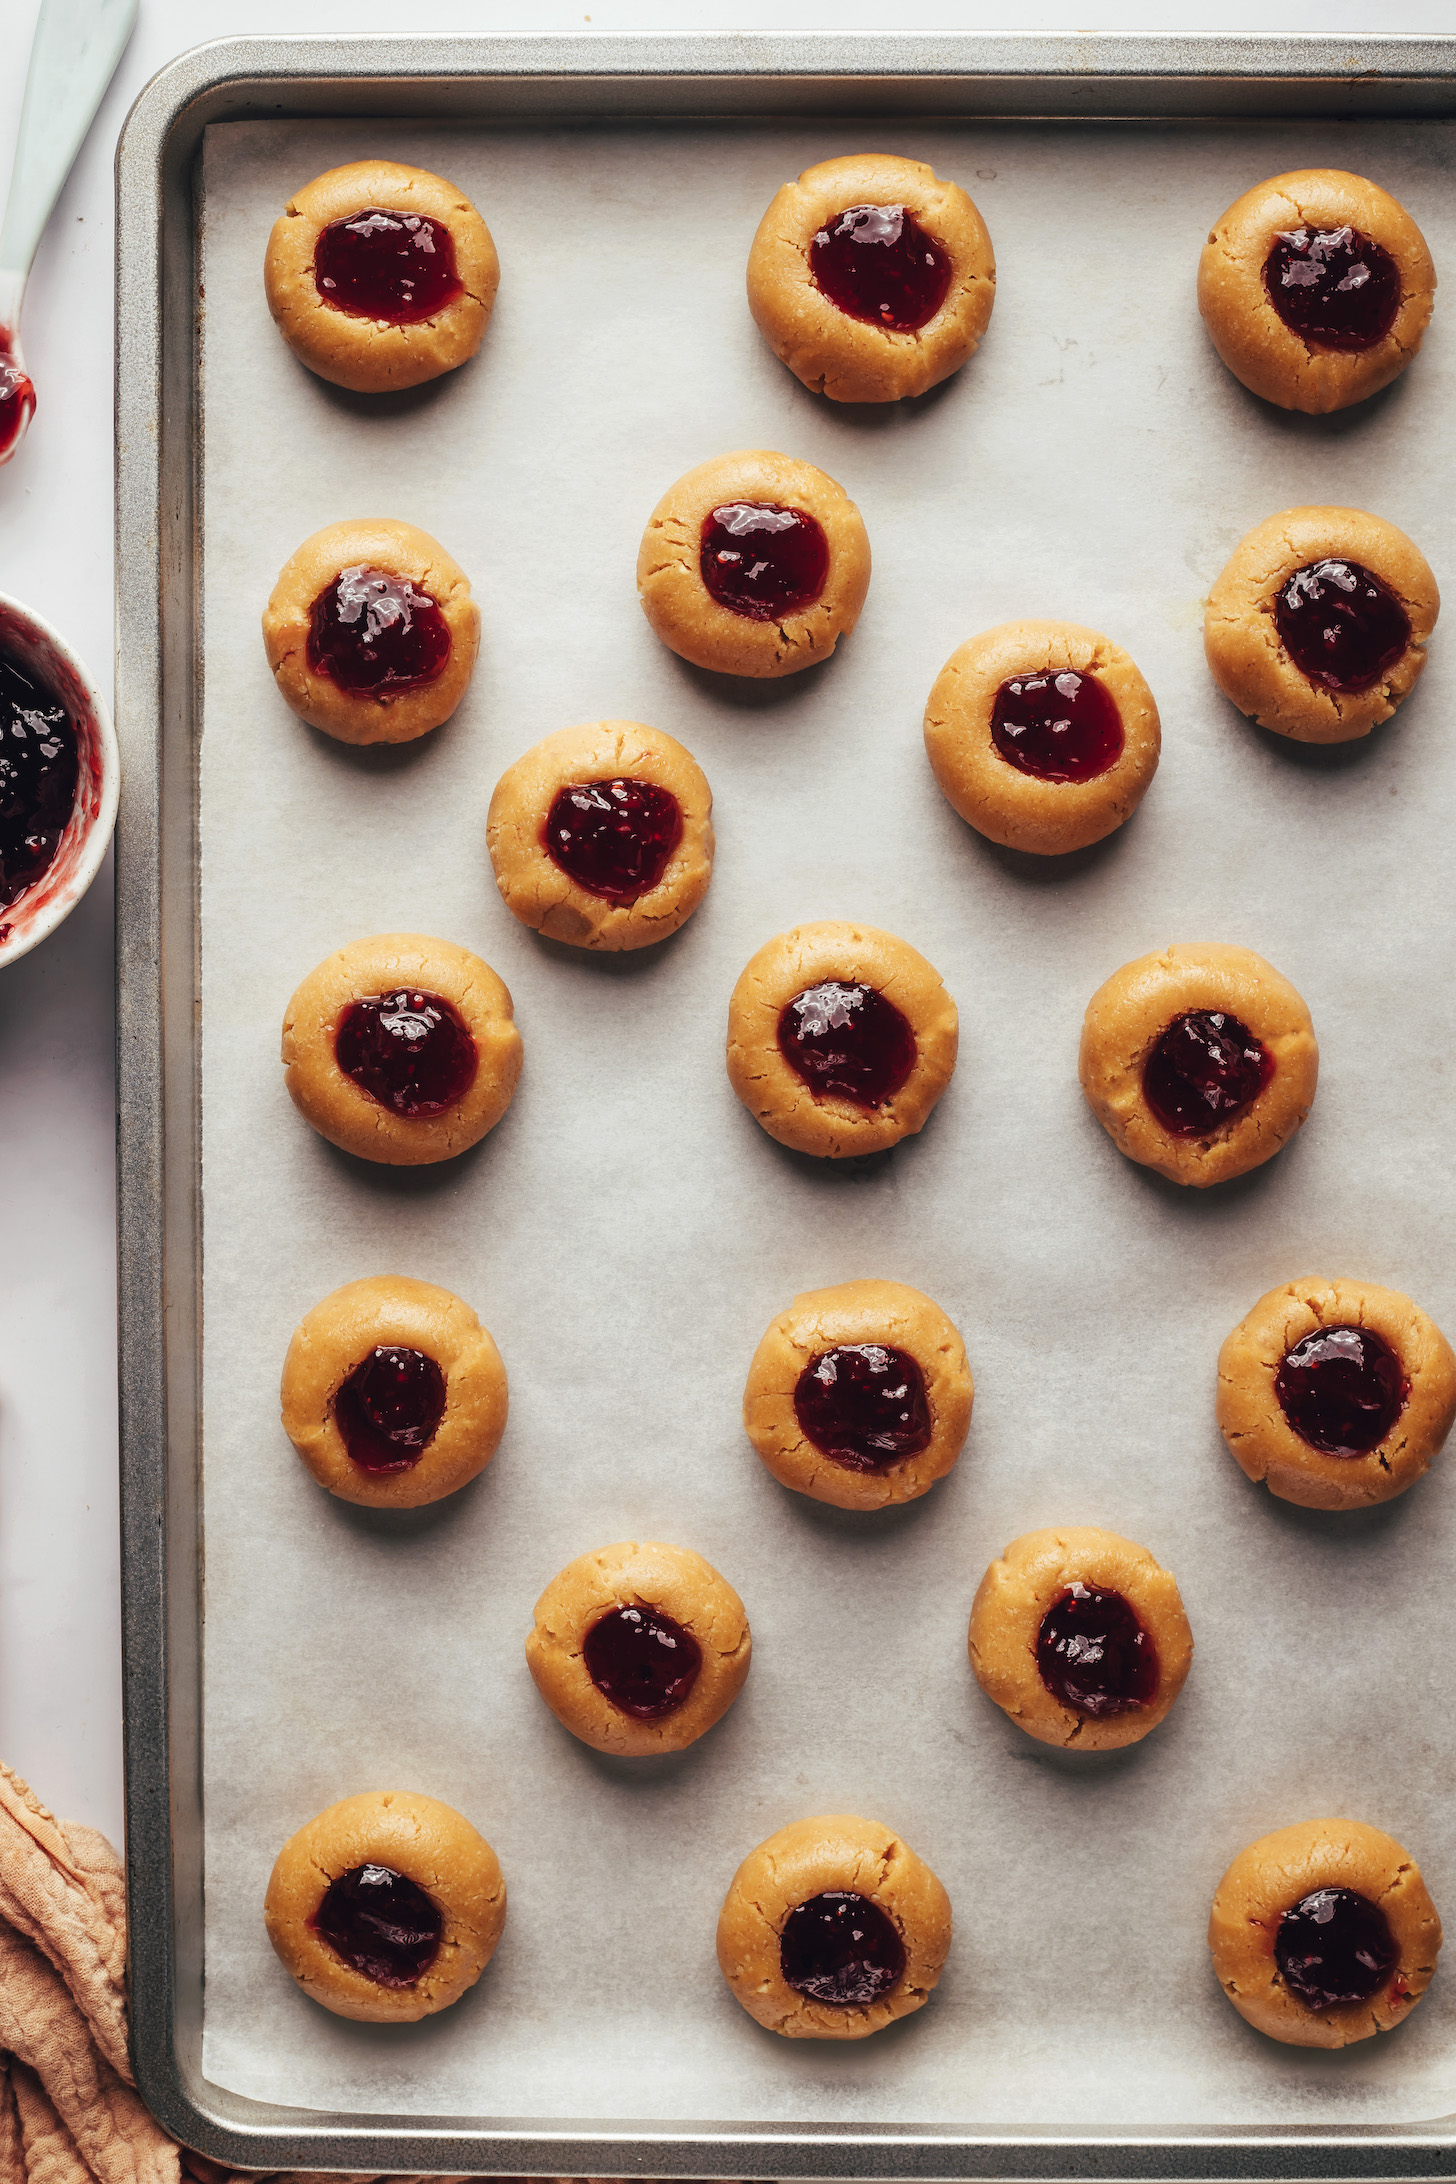 Dollops of jam inside peanut butter dough with the centers pressed in